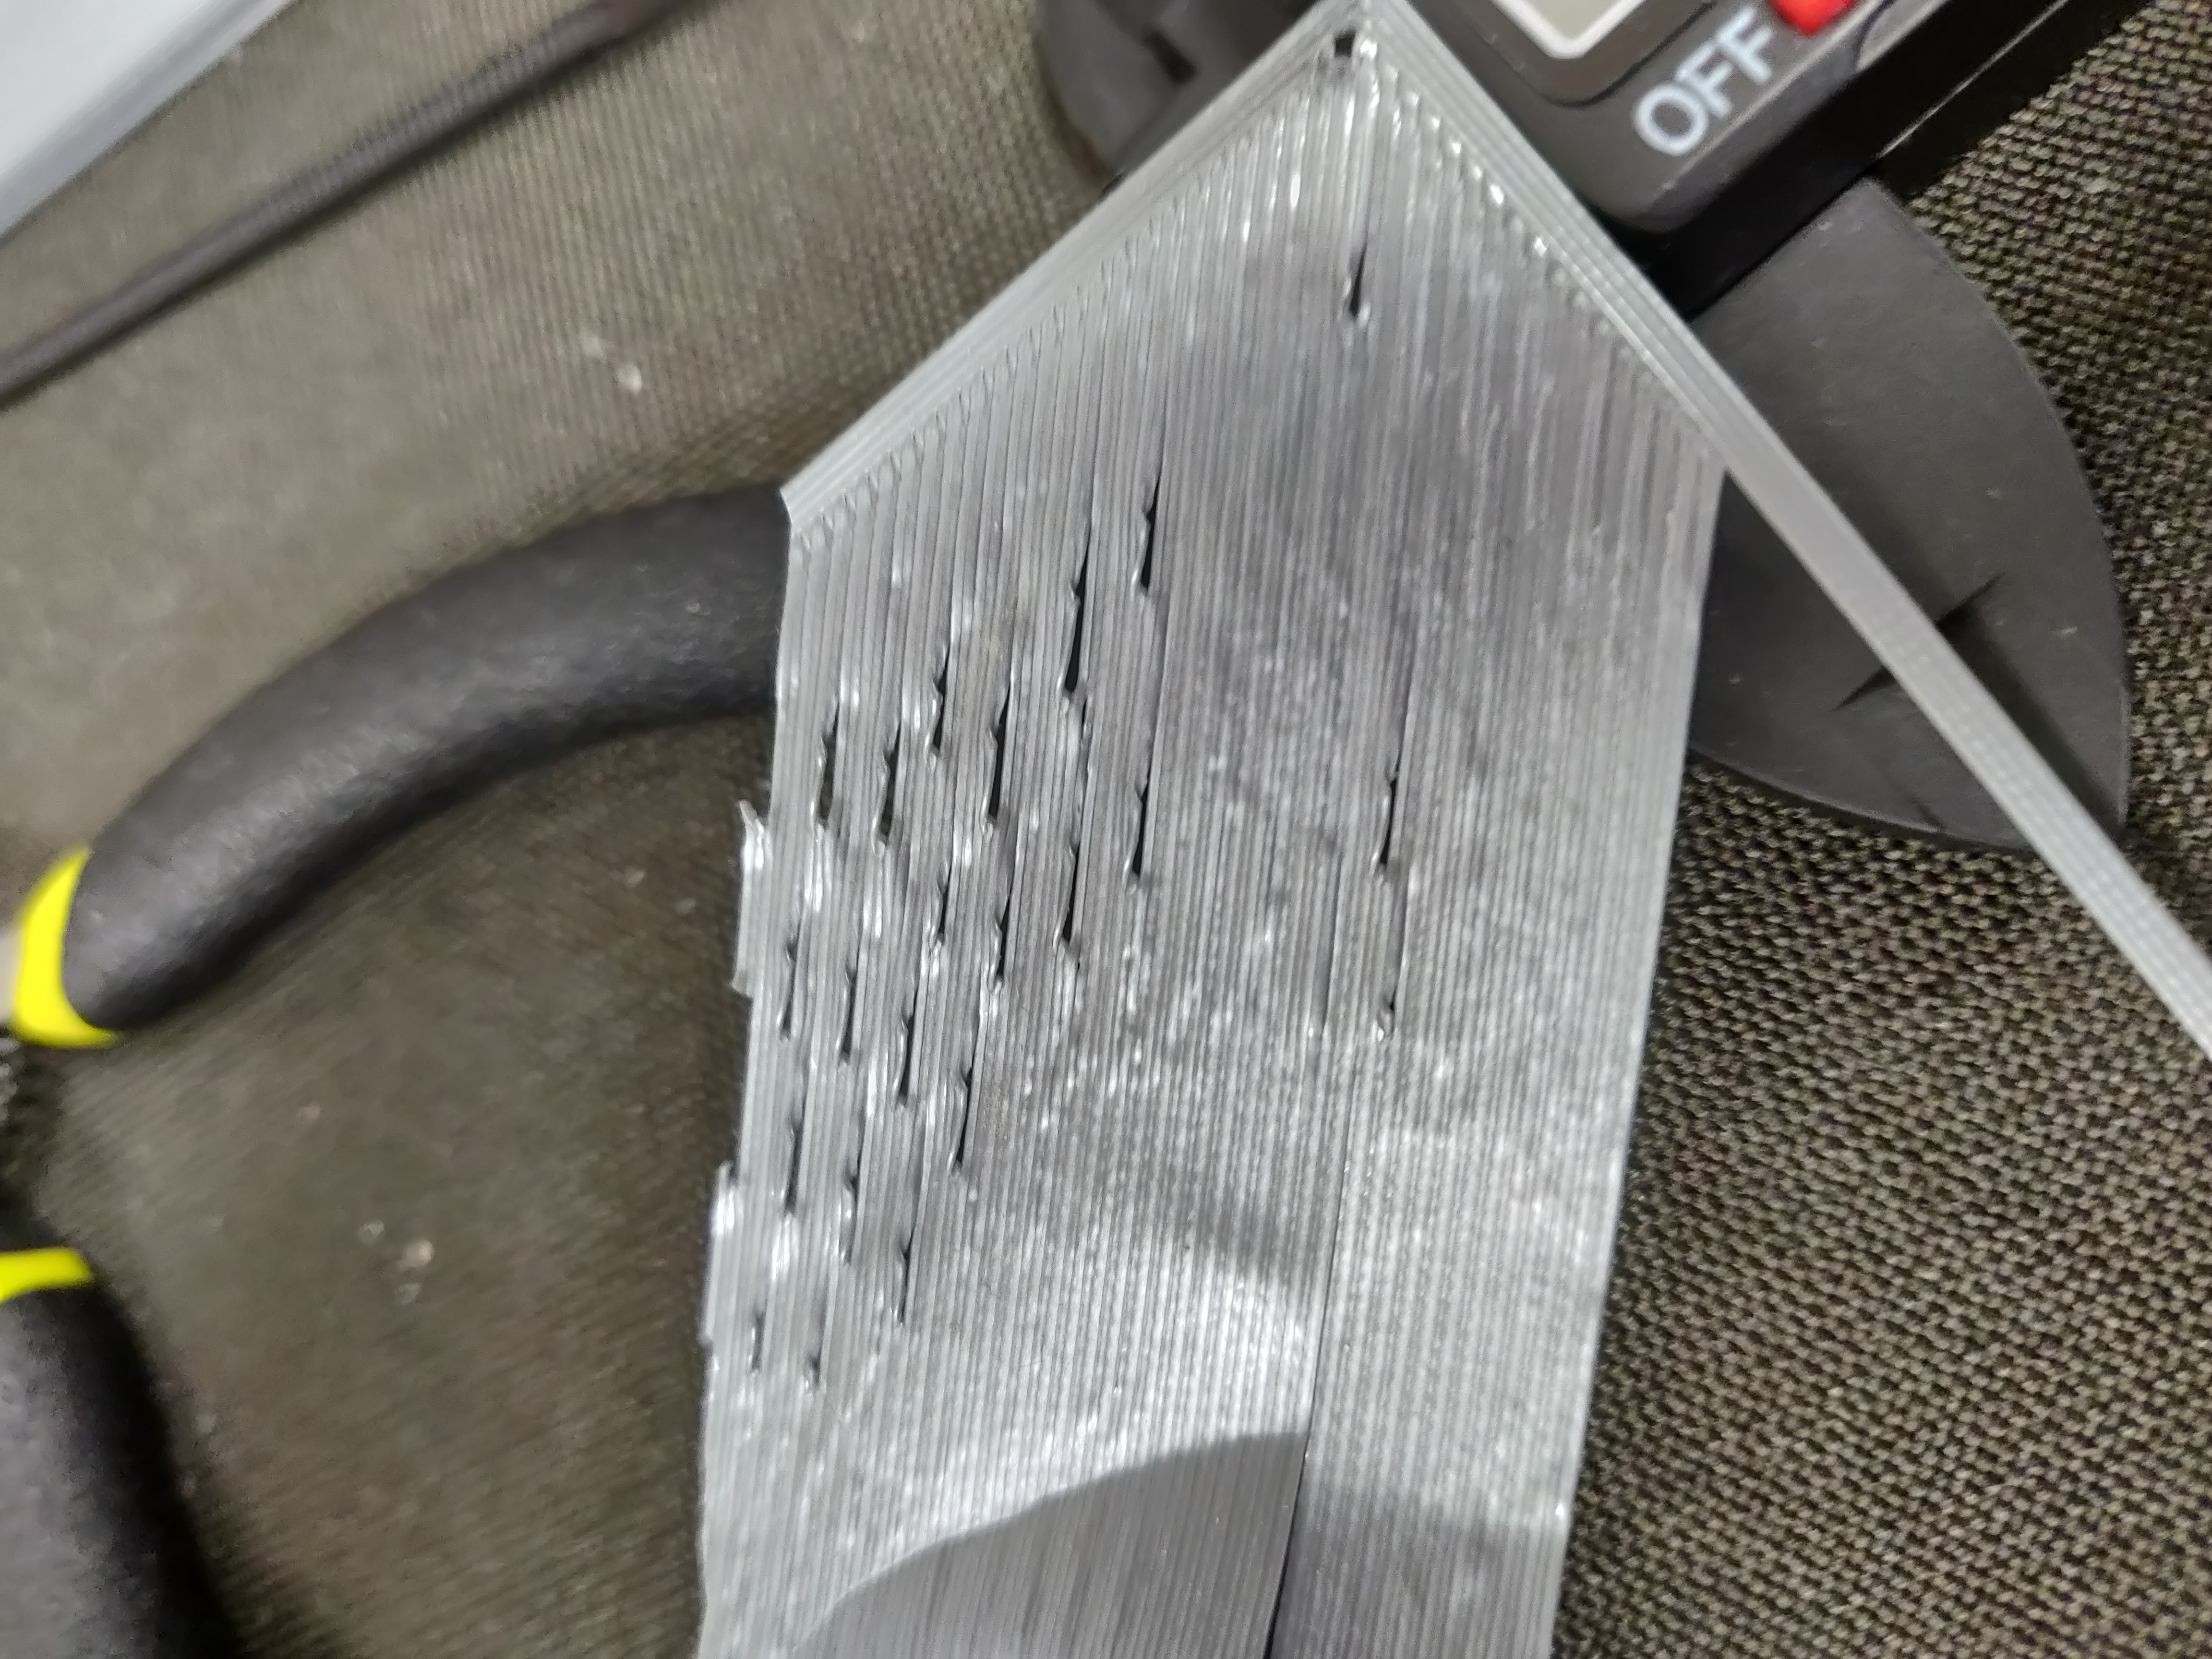 Bad print quality on my new MK3S – Assembly and prints troubleshooting – Prusa3D Forum